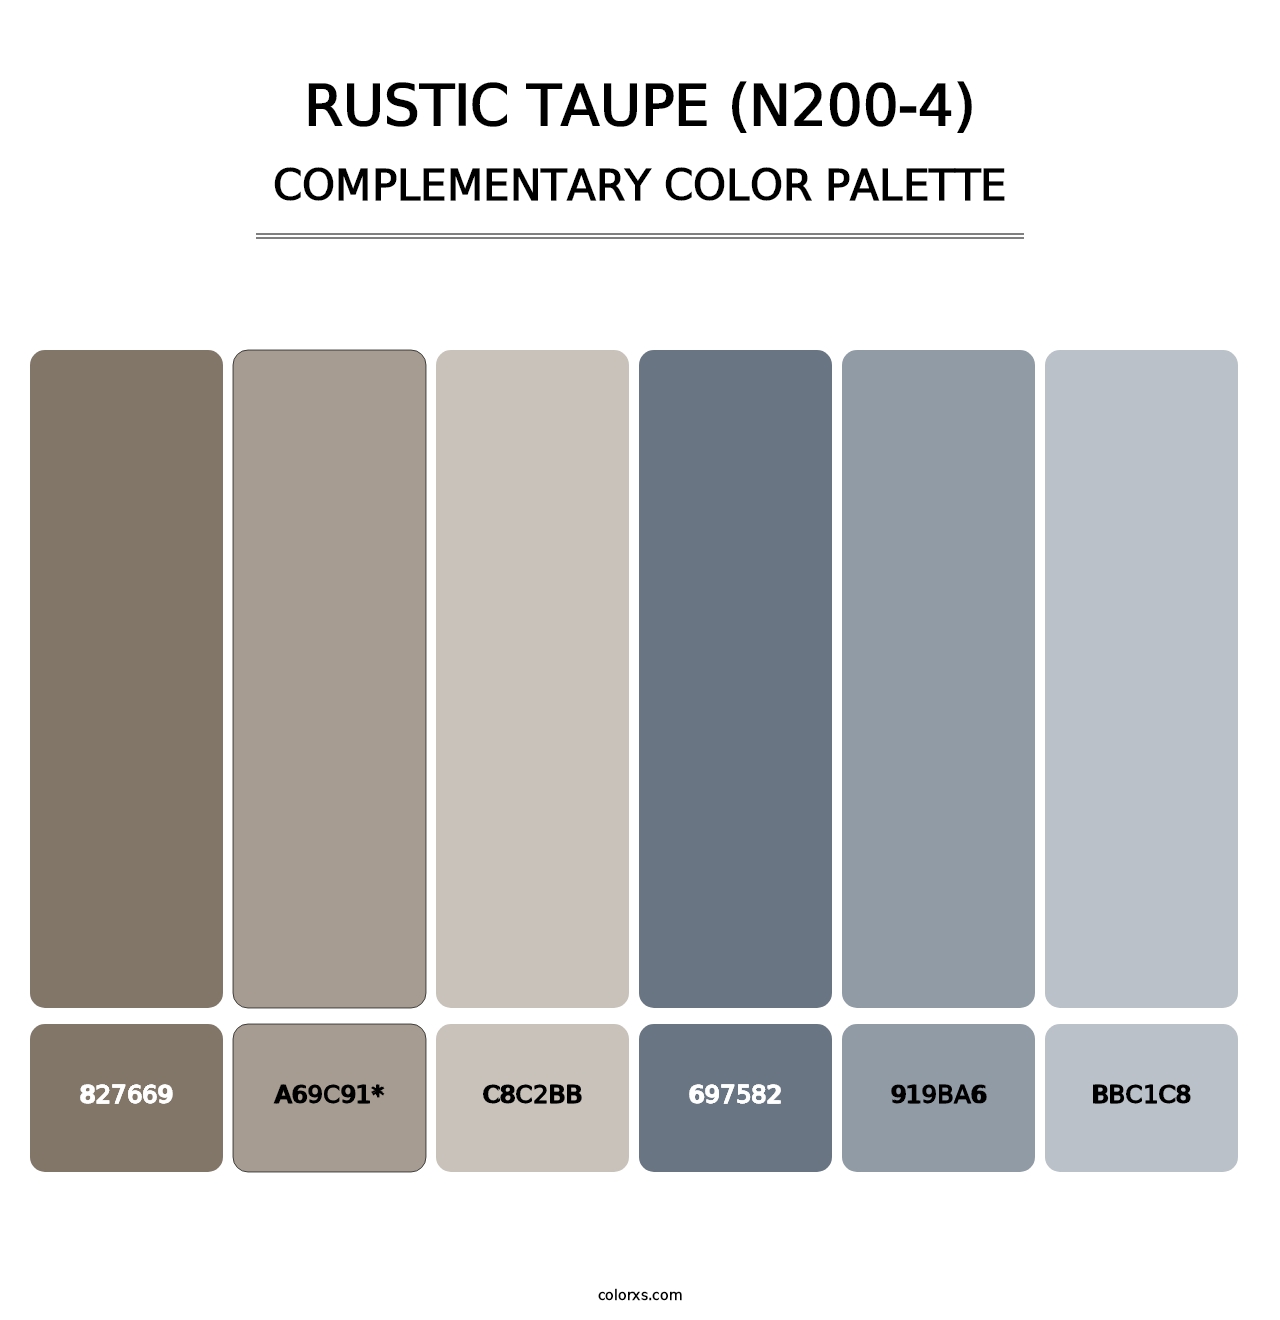 Rustic Taupe (N200-4) - Complementary Color Palette